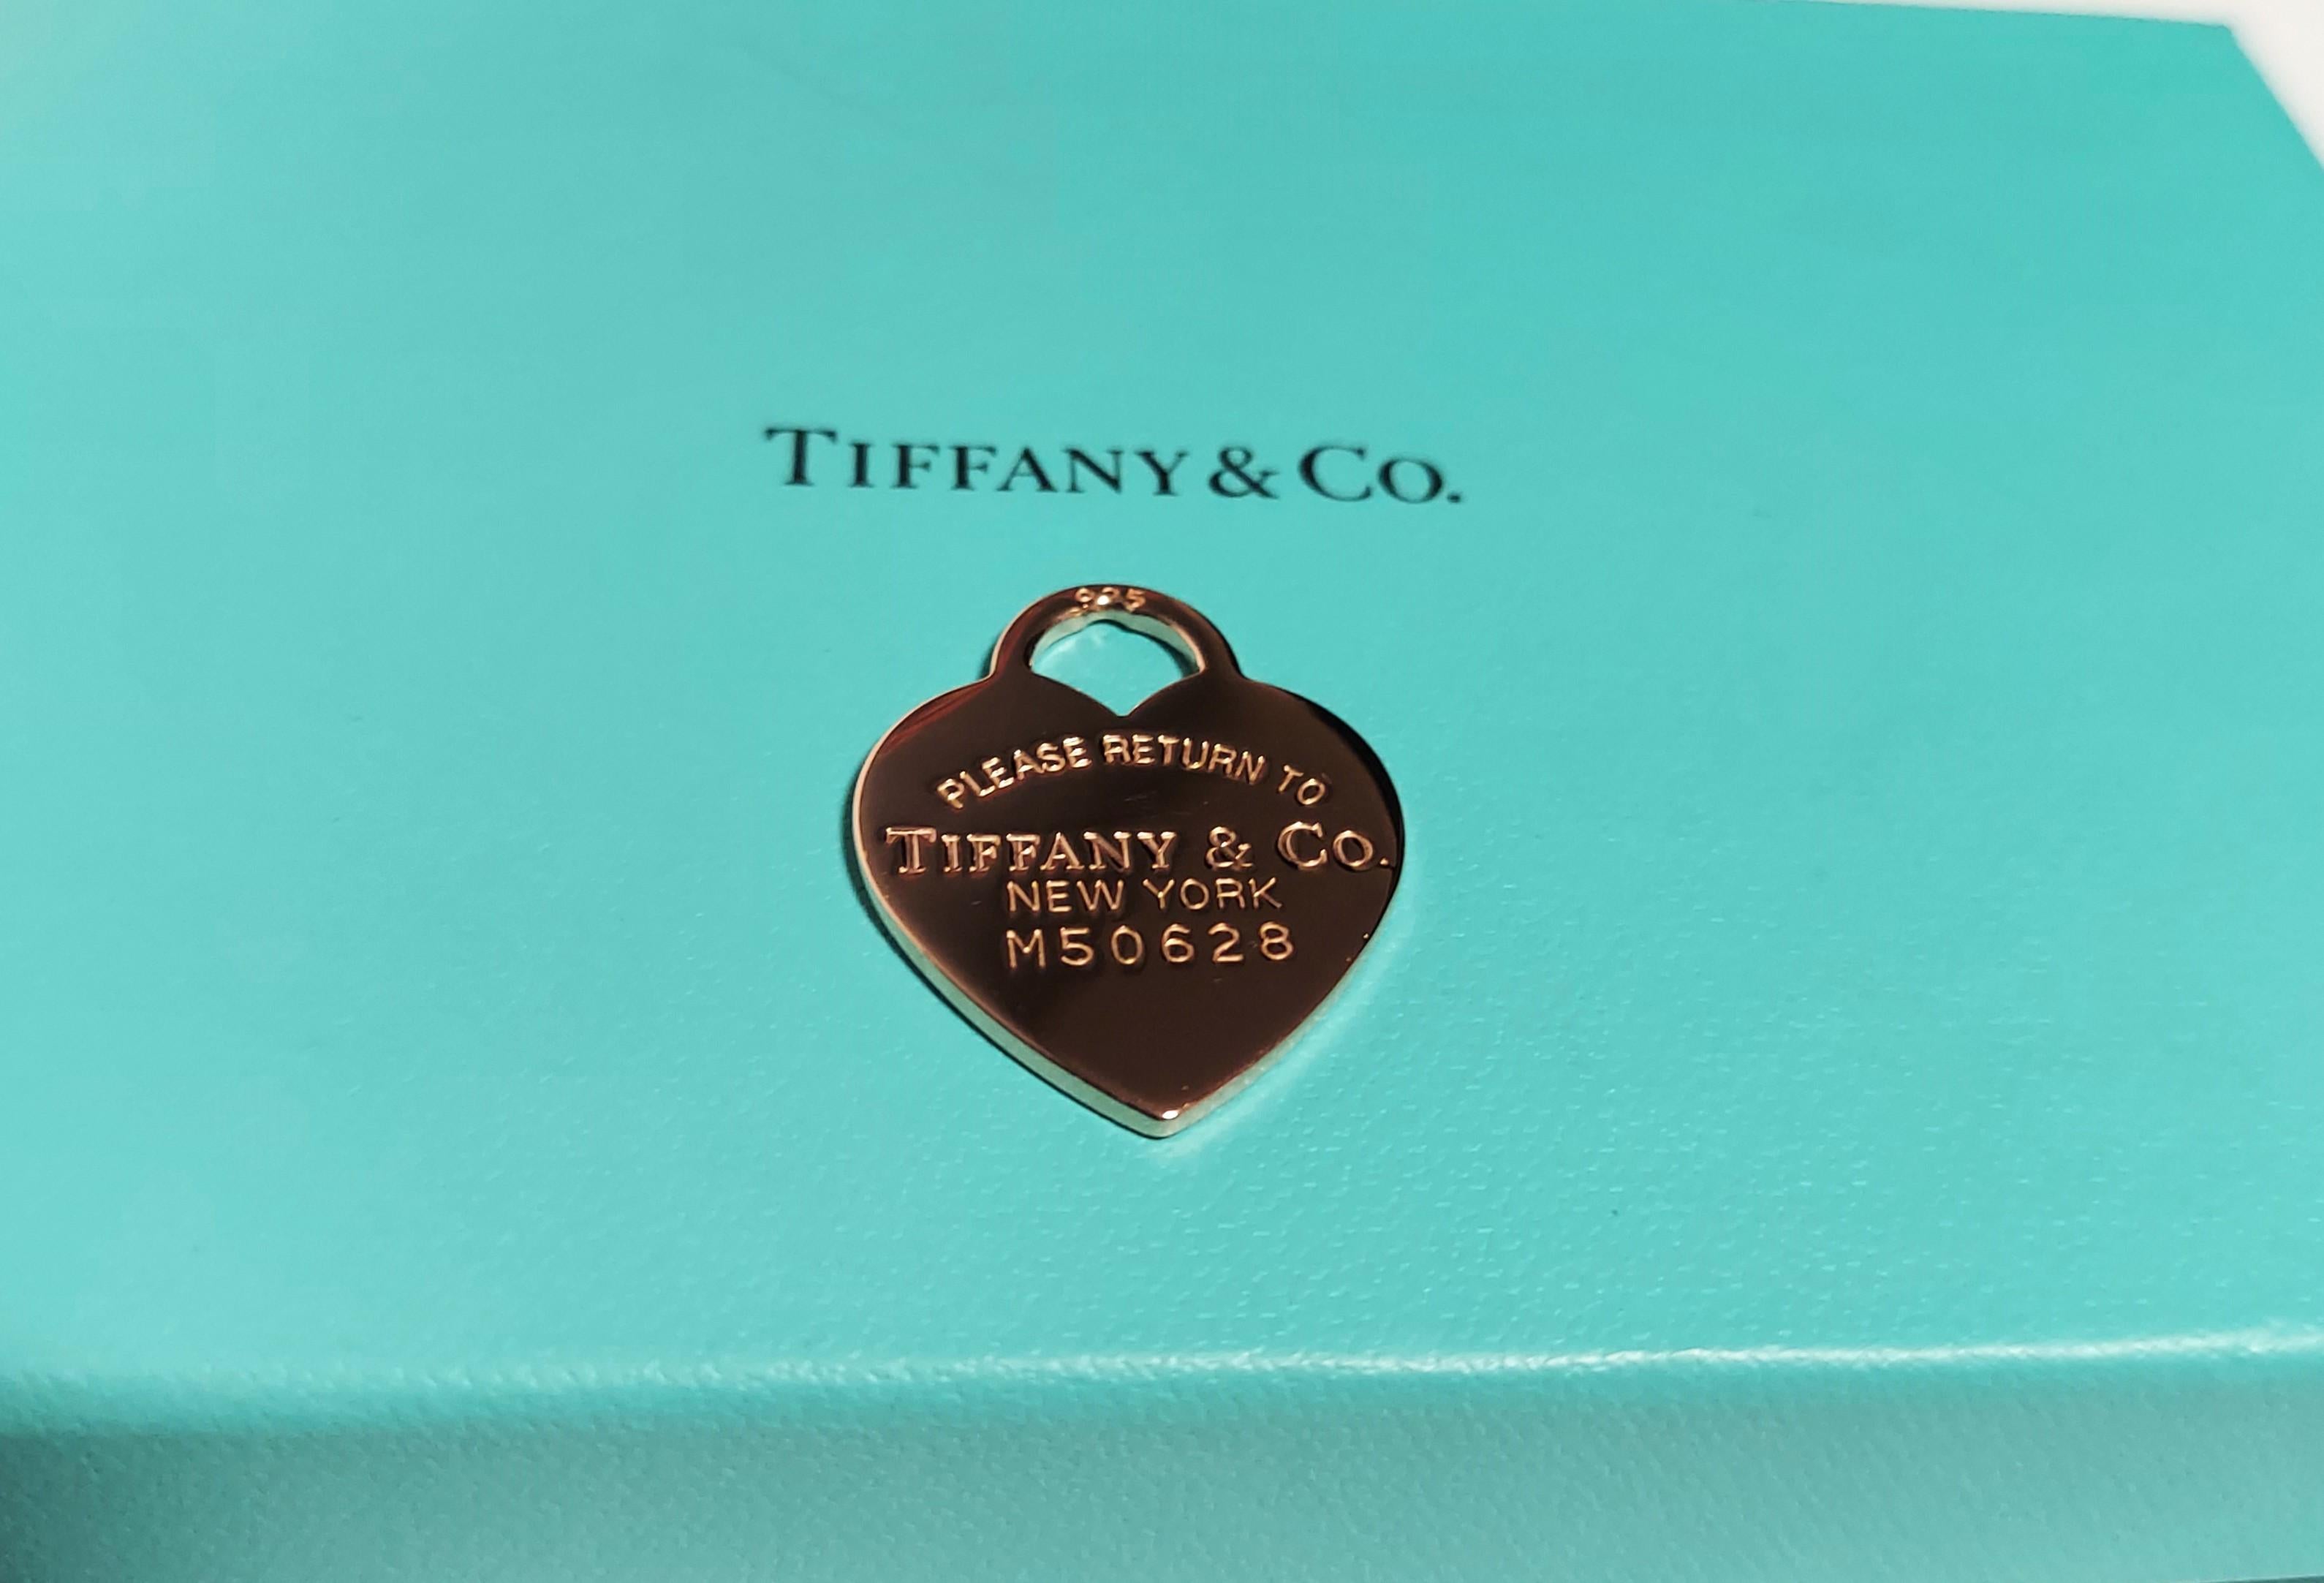 (Item Description)
Brand - Tiffany &Co.
Gender - Unisex
Condition - Pre-Owned
Style - Heart Pendant
Metals - 925 Silver
Coating - 24k Rose Gold
Weight - 4.0 Grams
length -1 Inch Approx.
(Pendant Only)